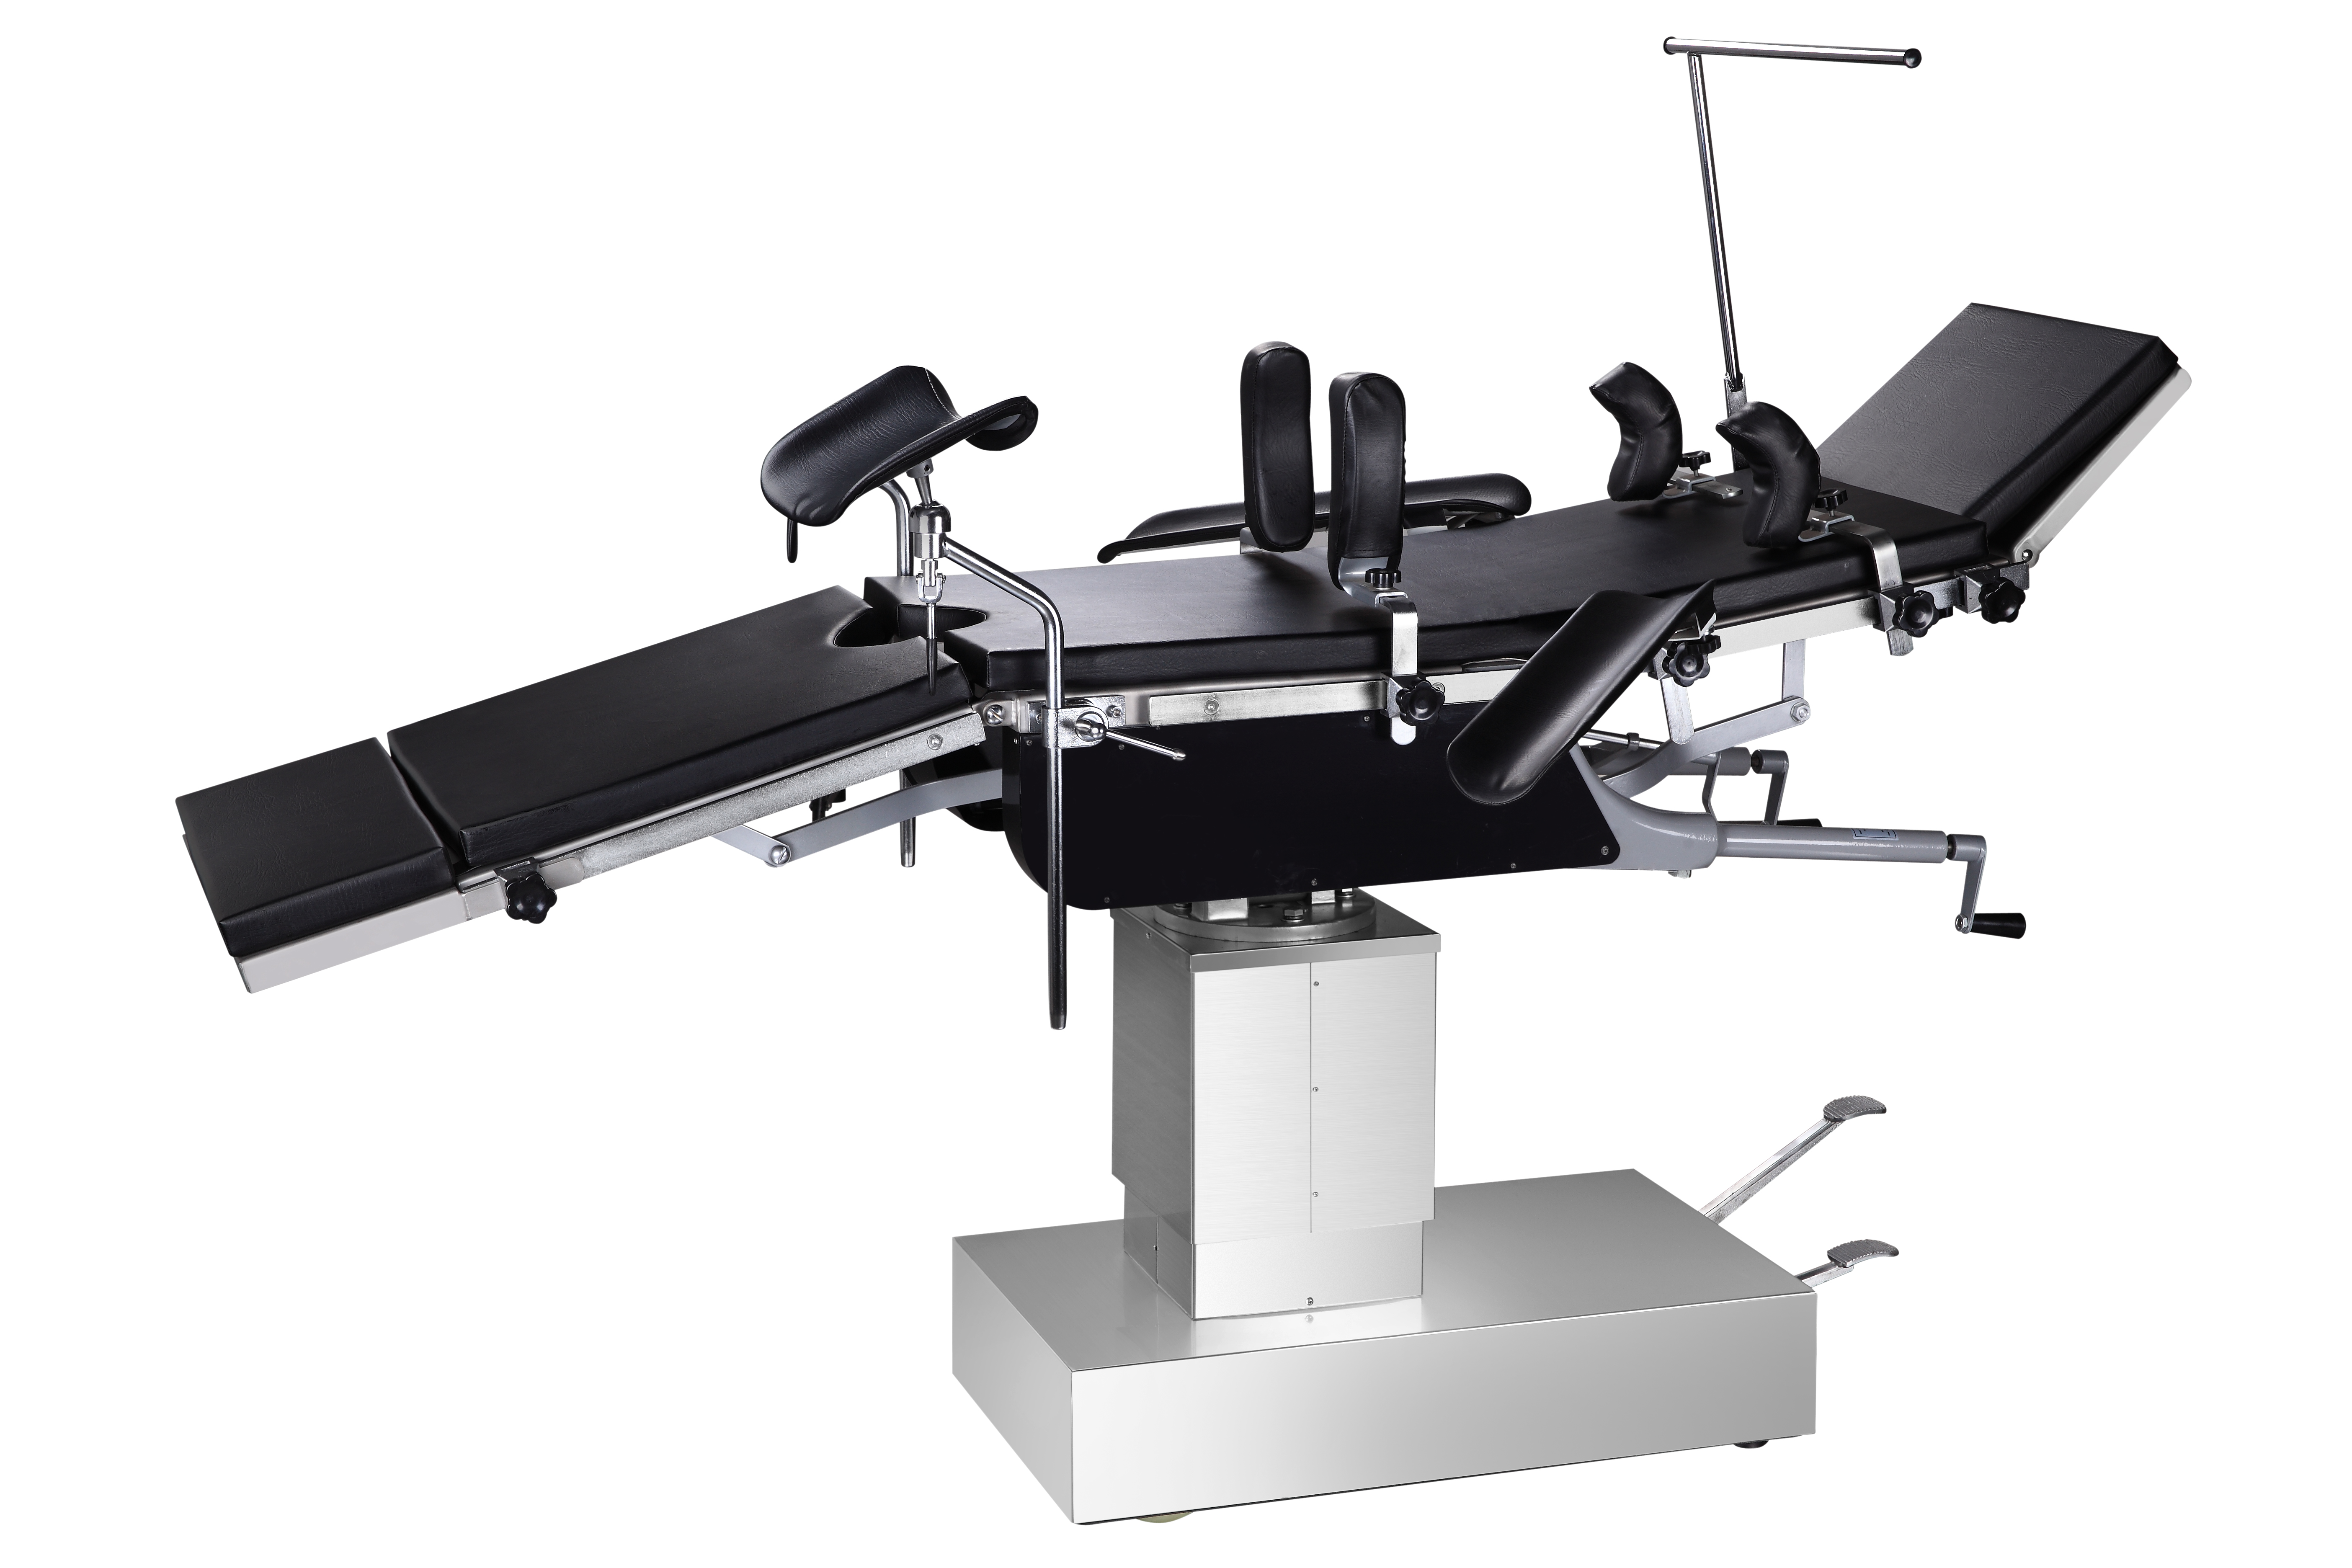 Hospital Surgical Equipment General-Use Manual Hydraulic Operation Theater Operating Table